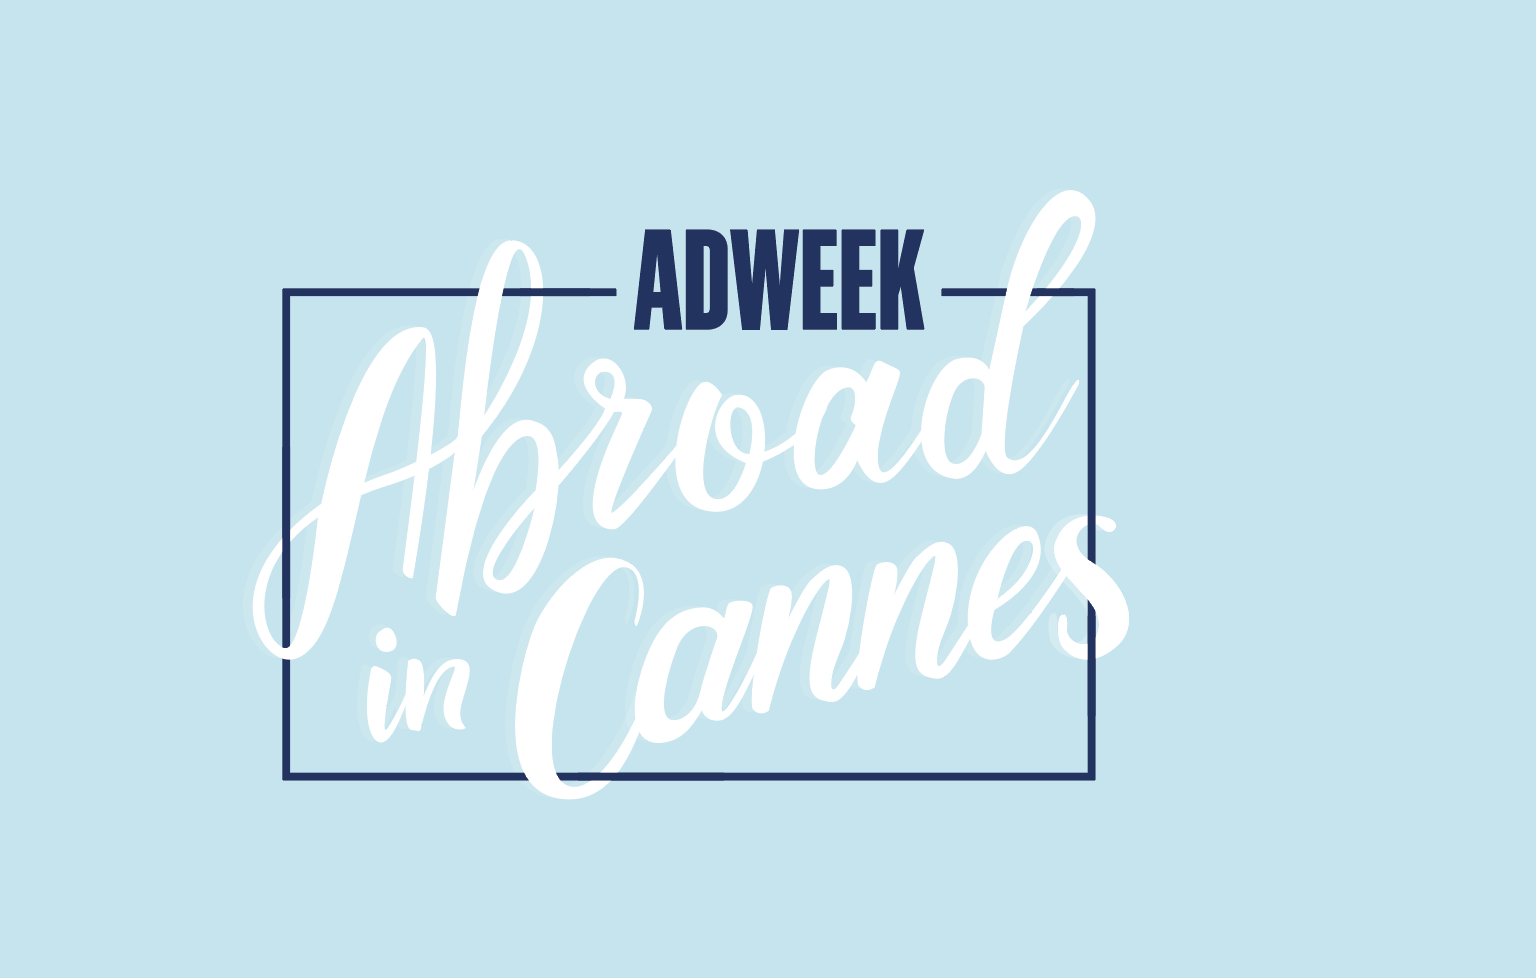 Adweek Abroad in Cannes 